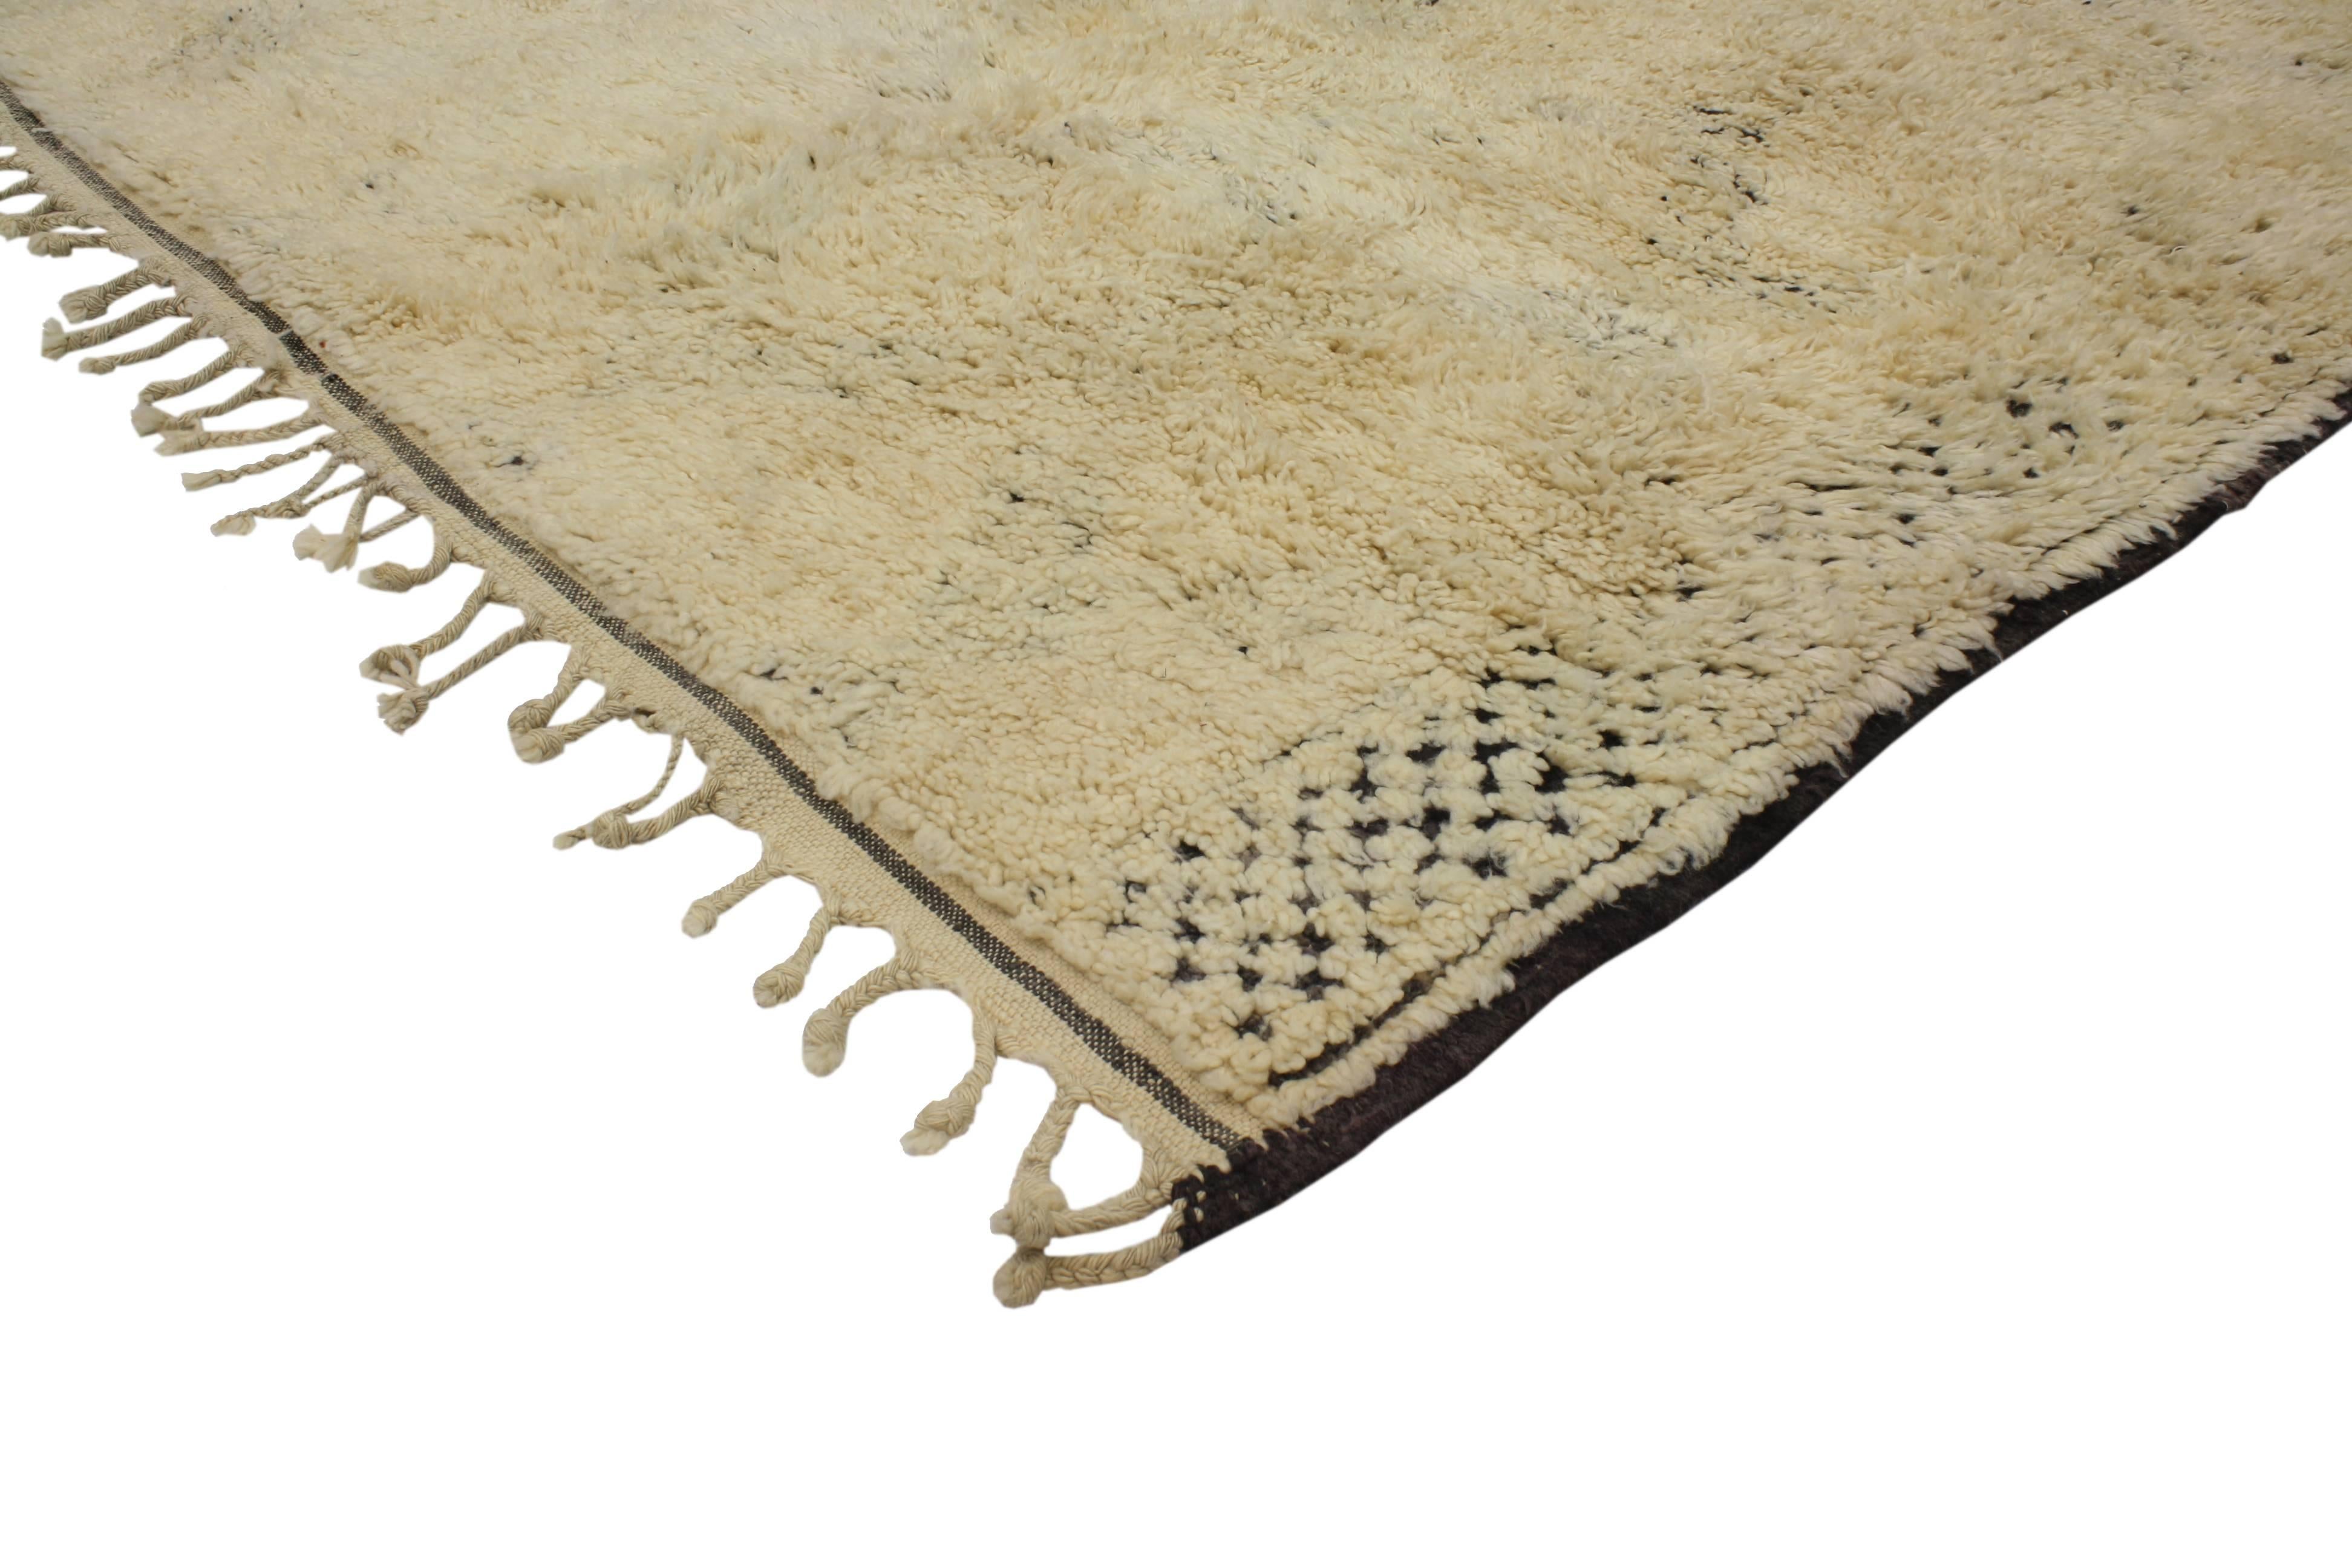 With its luxurious wool and plush pile, turn your back on the cold with this vintage Beni Mguild Moroccan rug. With its Mid-Century Modern style, this Beni Mguild rug connects the feel of nomadic tribe history with today’s interiors. As time goes by